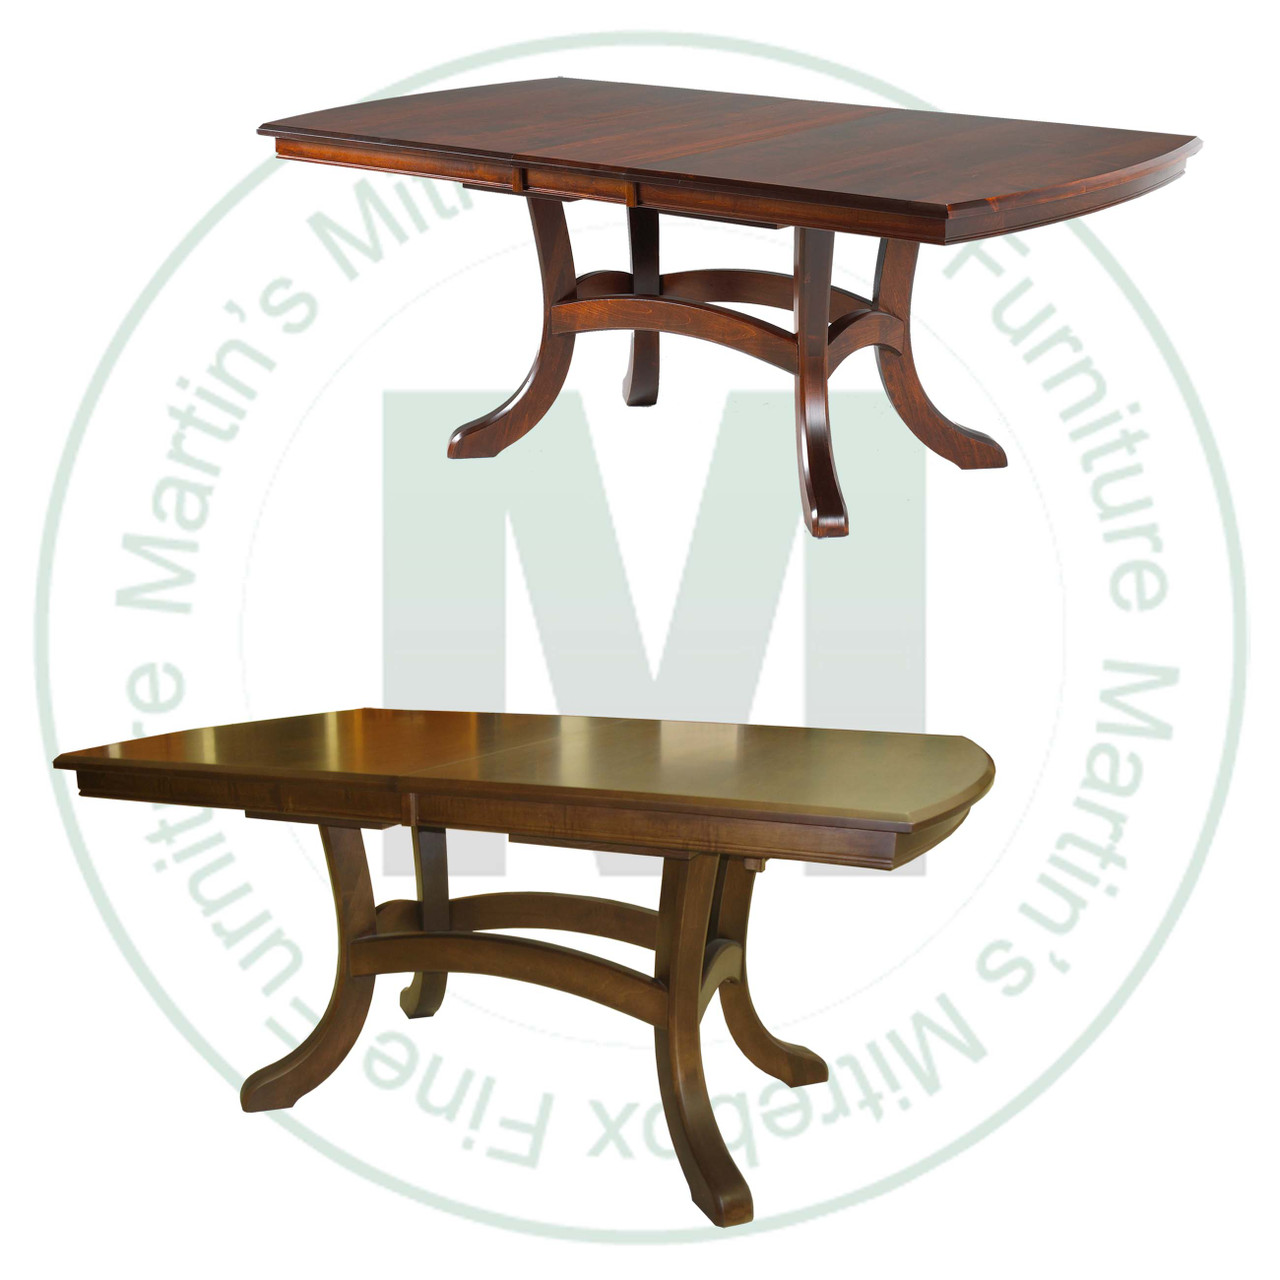 Oak Jordan Double Pedestal Table 42''D x 66''W x 30''H With 4 - 12'' Leaves. Table Has 1.25'' Thick Top